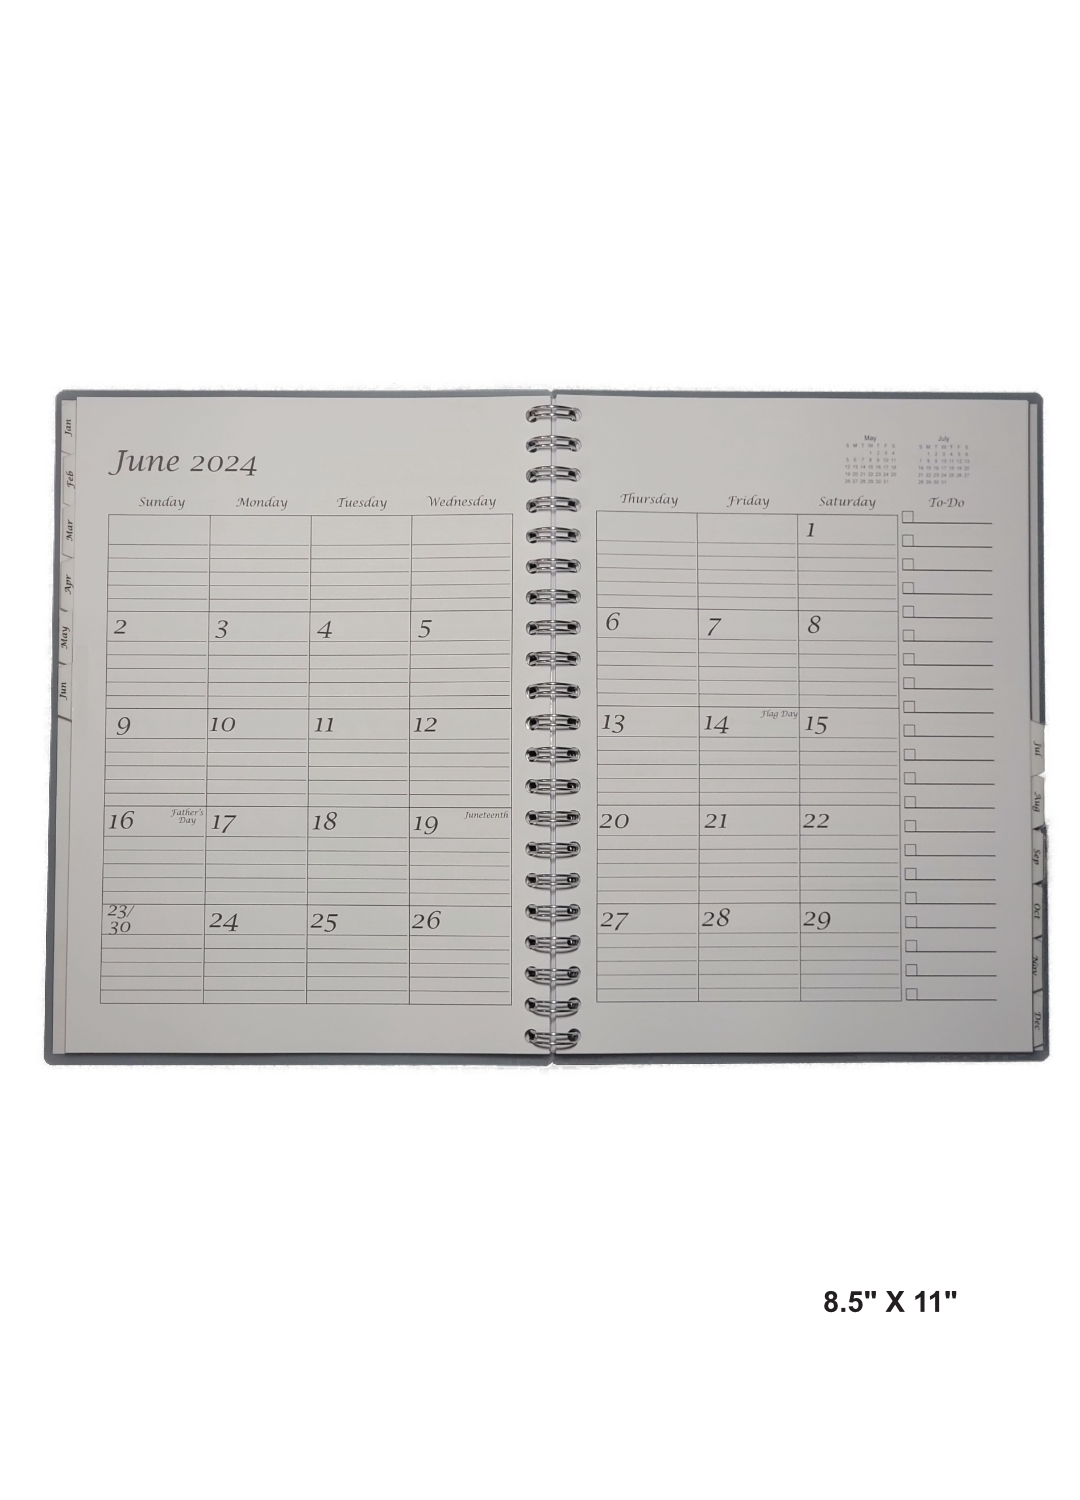 Inside view of a 8.5" x 11" hand-made 12 month planner with a clean and organized layout. Each month has dedicated pages with ample writing space and clear headings. A practical and visually appealing tool for staying organized.